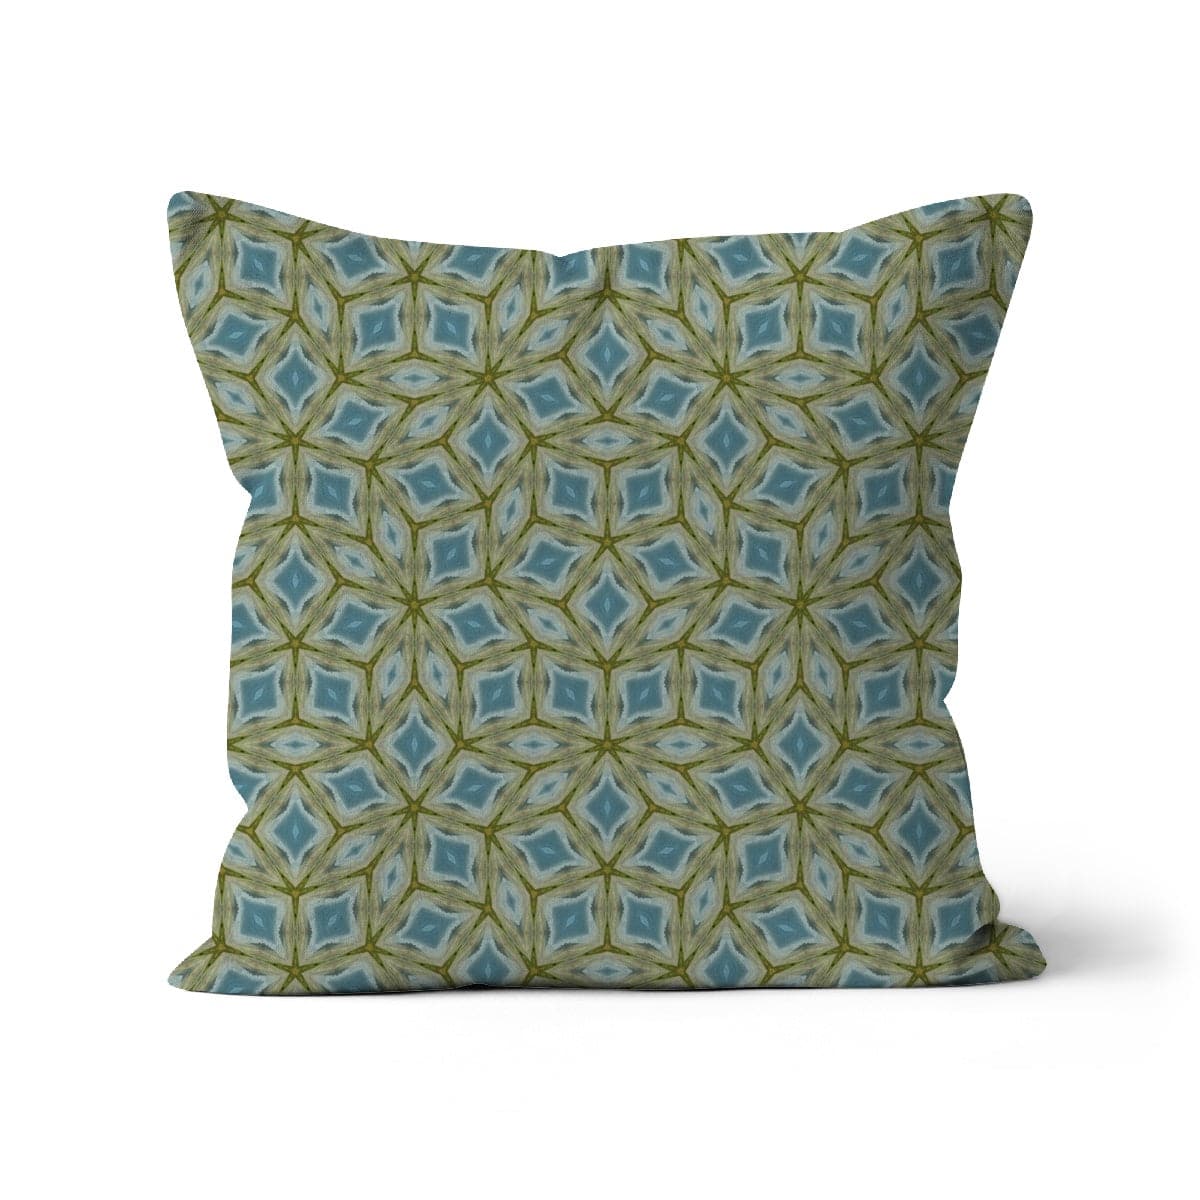 Sky and mountain rose pattern Cushion